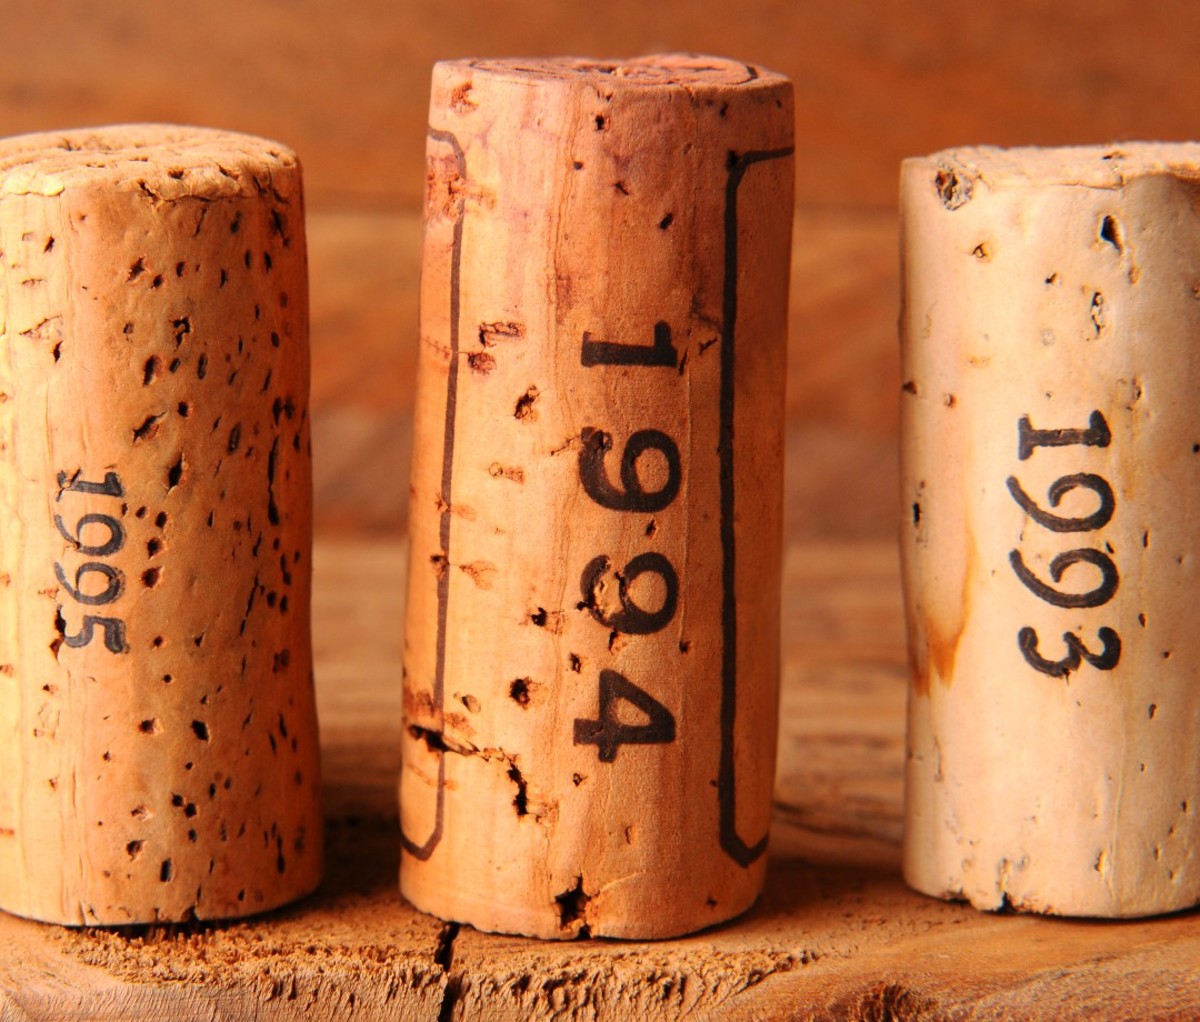 Wine corks with years printed on them.